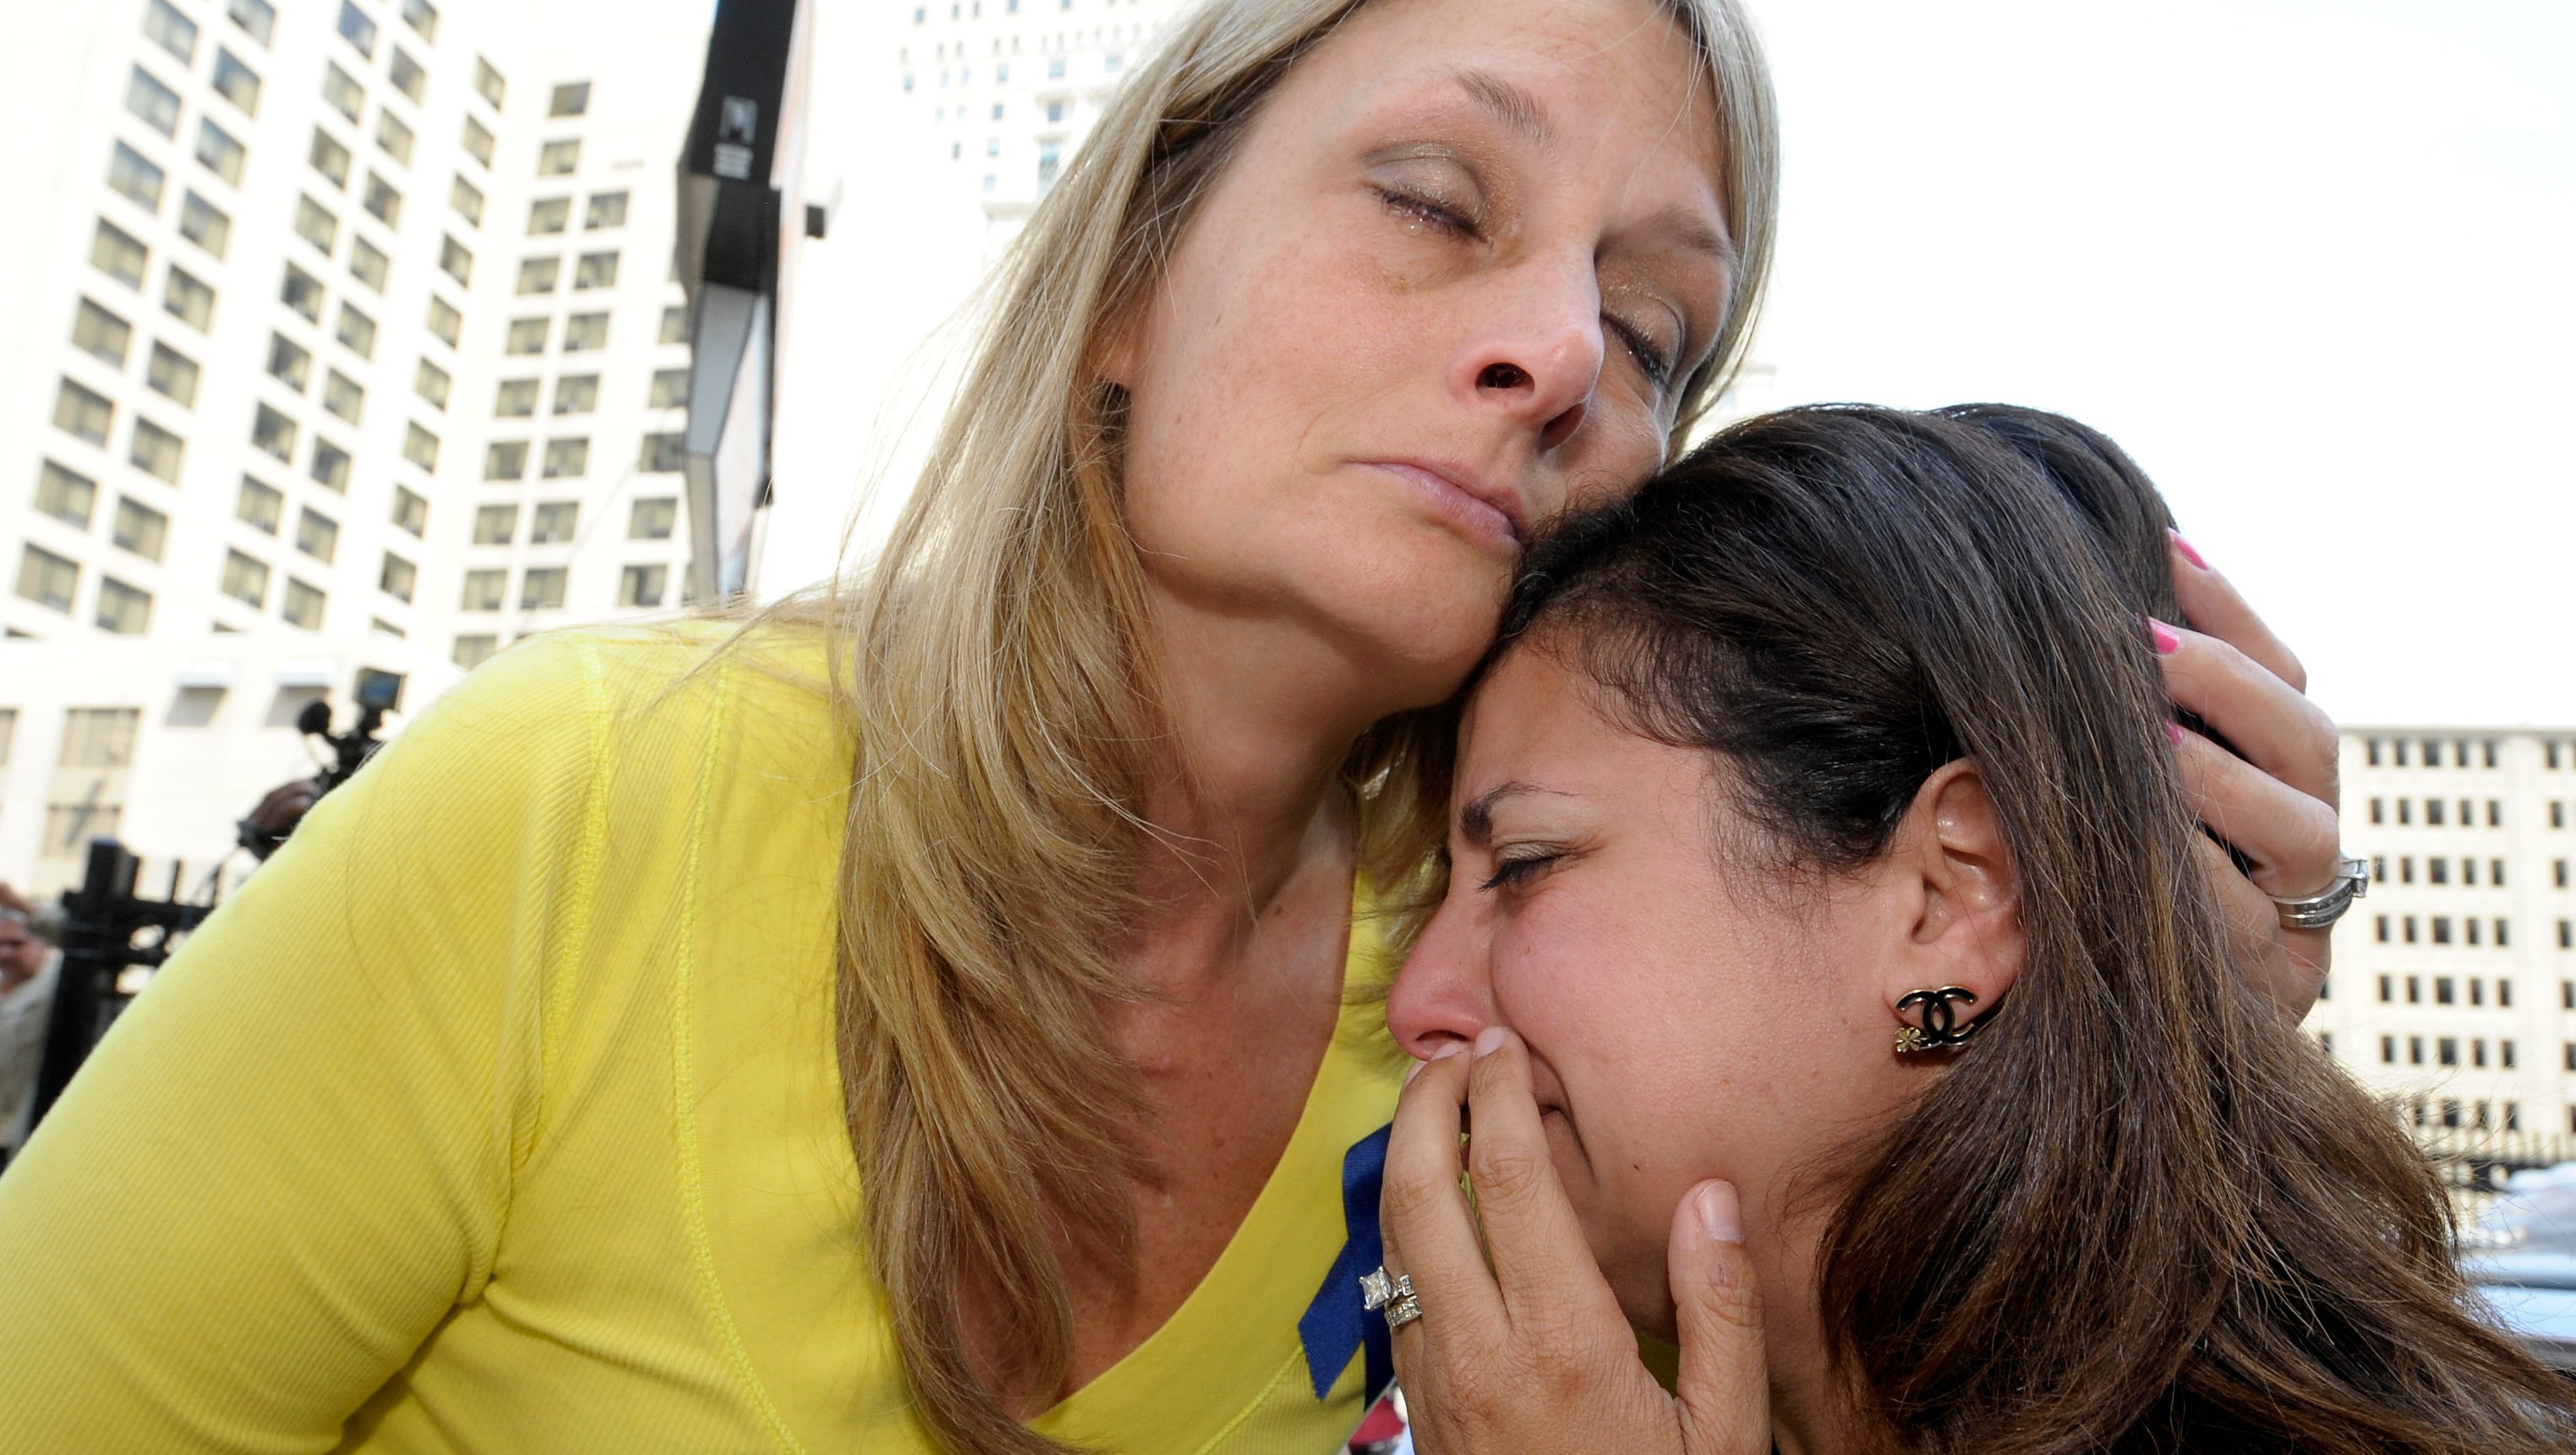 Cheryl Blades, left, of Waterford, hugs a woman who wishes not to be identified after the sentencing. The woman was treated by Fata while she was pregnant twice and is still treated for an unknown condition. Thus far, her children are healthy. Blades mother, Nancy LaFrance, died of lung cancer. Victims and the family members of victims are emotional as they leave the federal courthouse in Detroit, Friday afternoon, July 10, 2015, after they listen to the 45-year sentencing of Dr. Farid Fata for misdiagnosis of cancer and Medicare fraud.